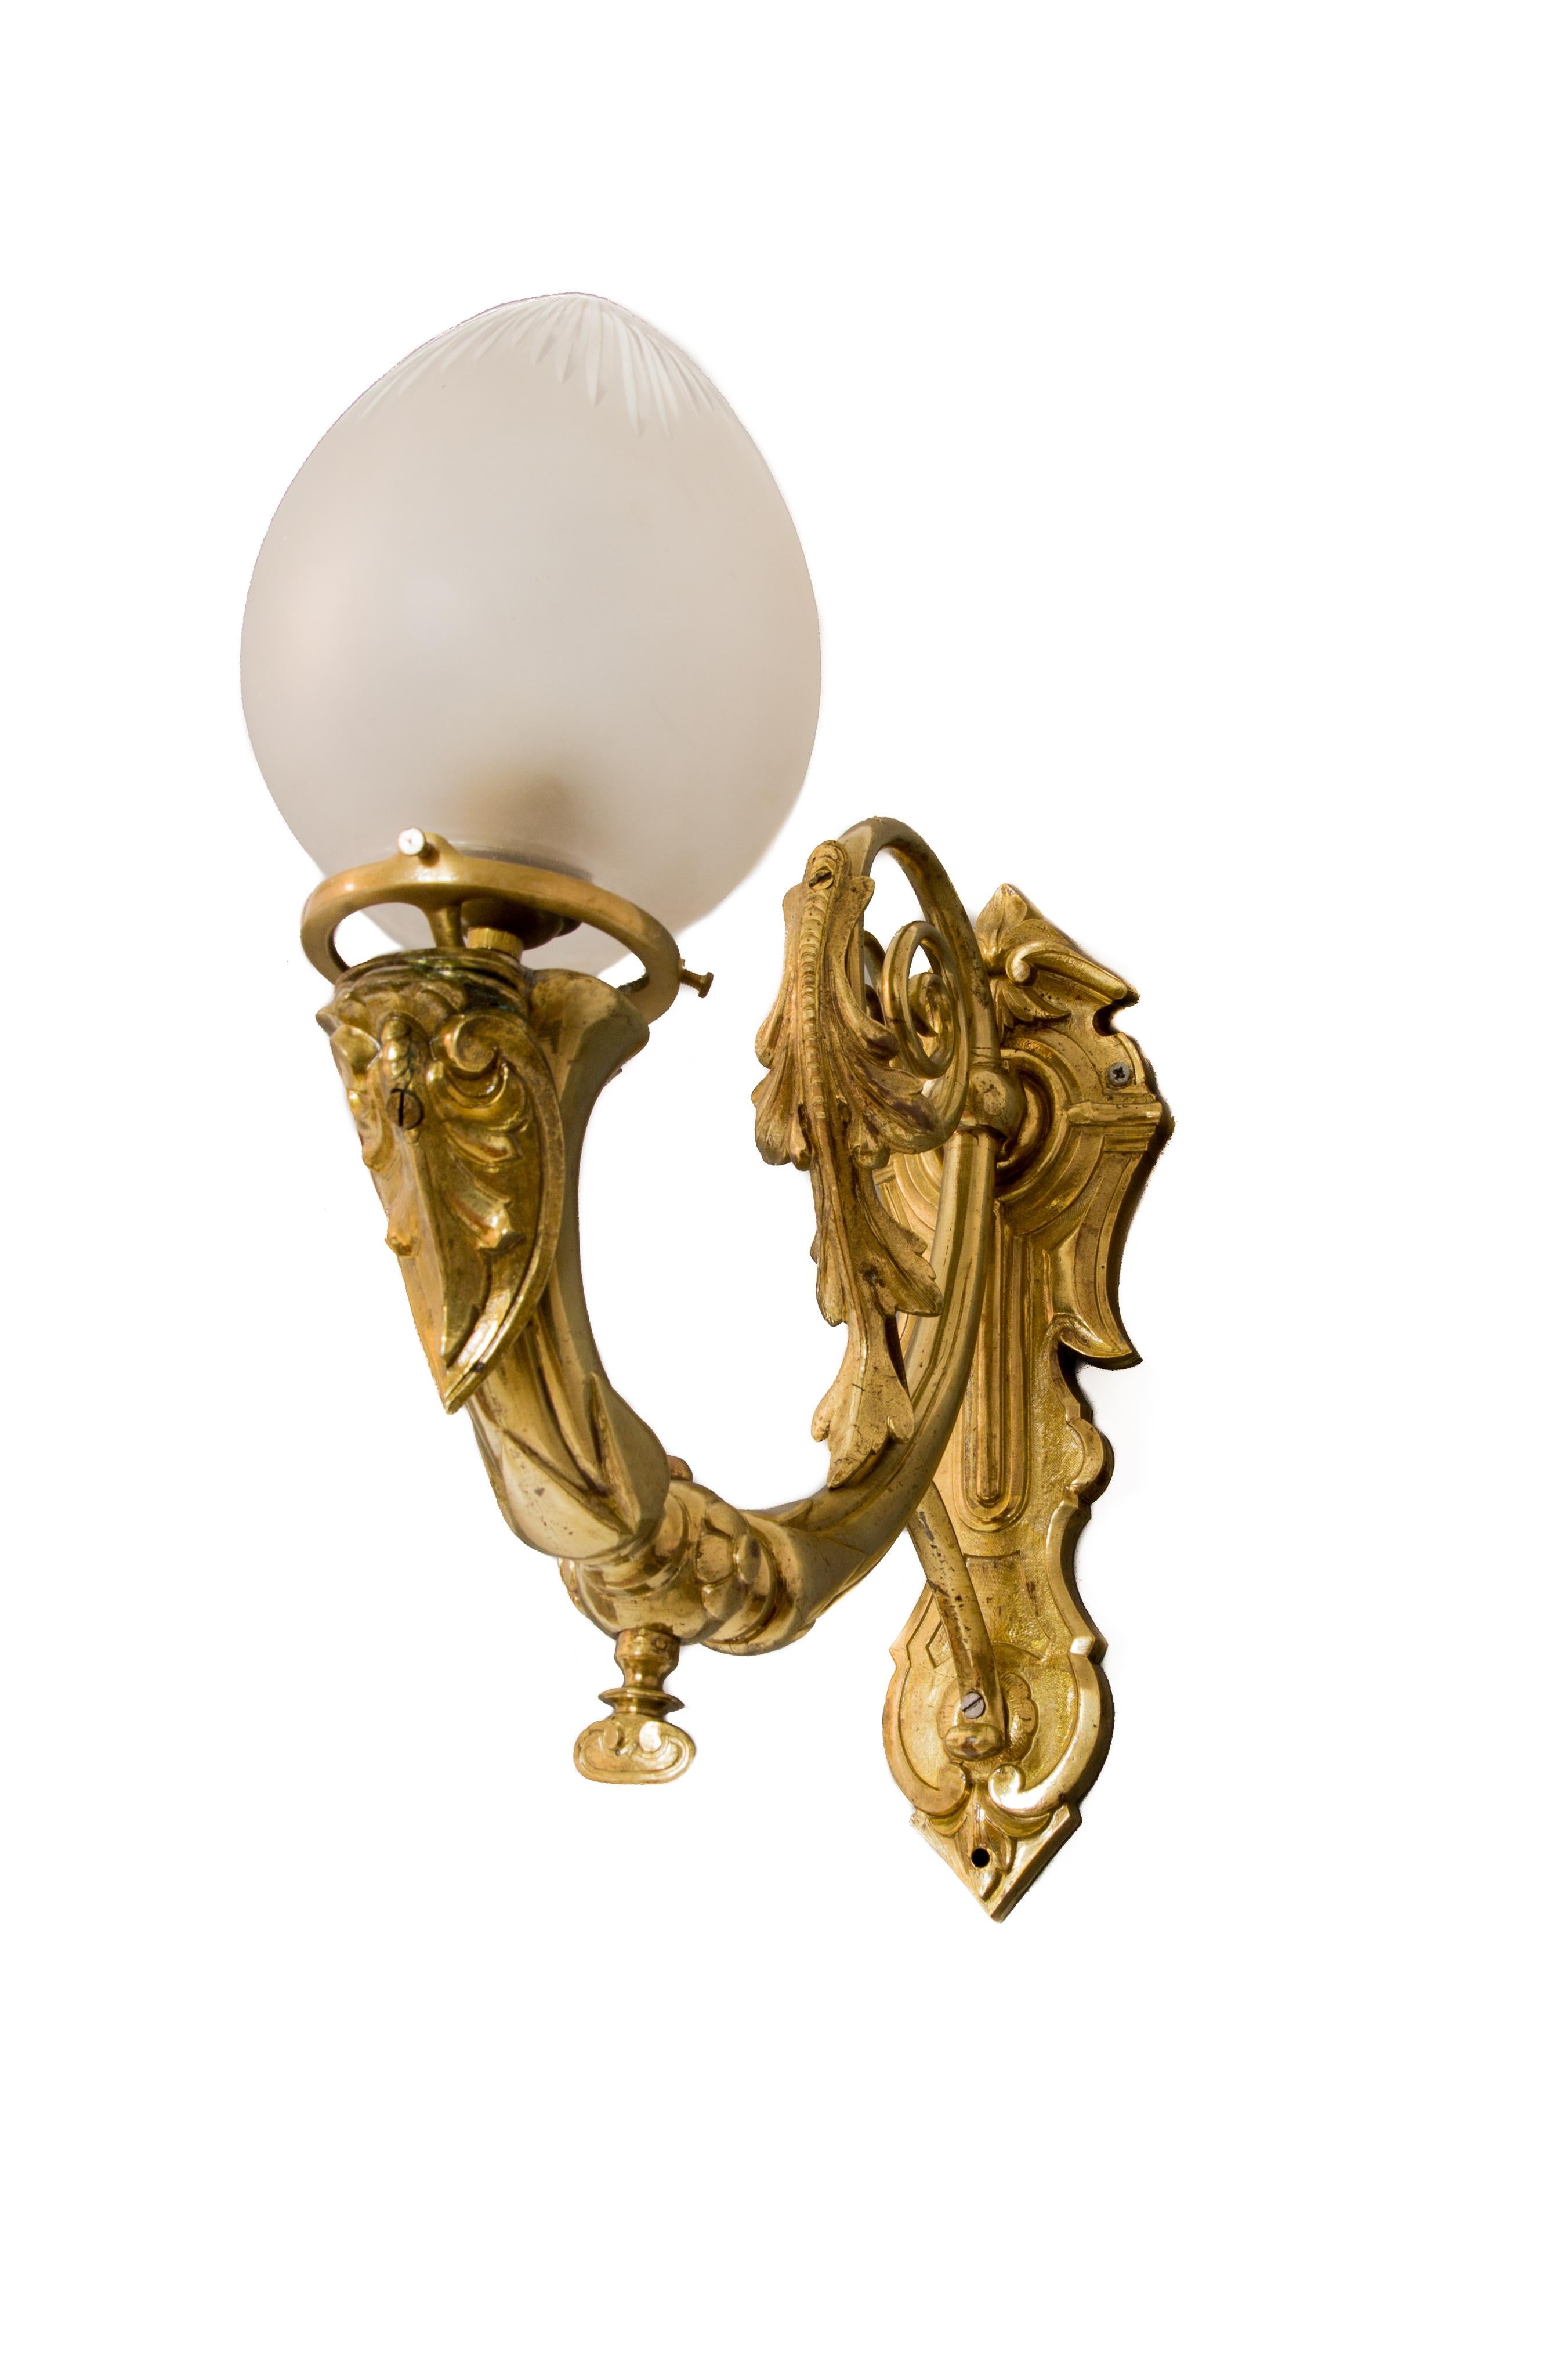 Beautiful Belle Époque period French bronze sconce with frosted glass oviform glass shade. Originally crafted as a gas-powered fixture, this antique sconce was properly converted to electric and wired with an E-27 porcelain socket. Decorated with